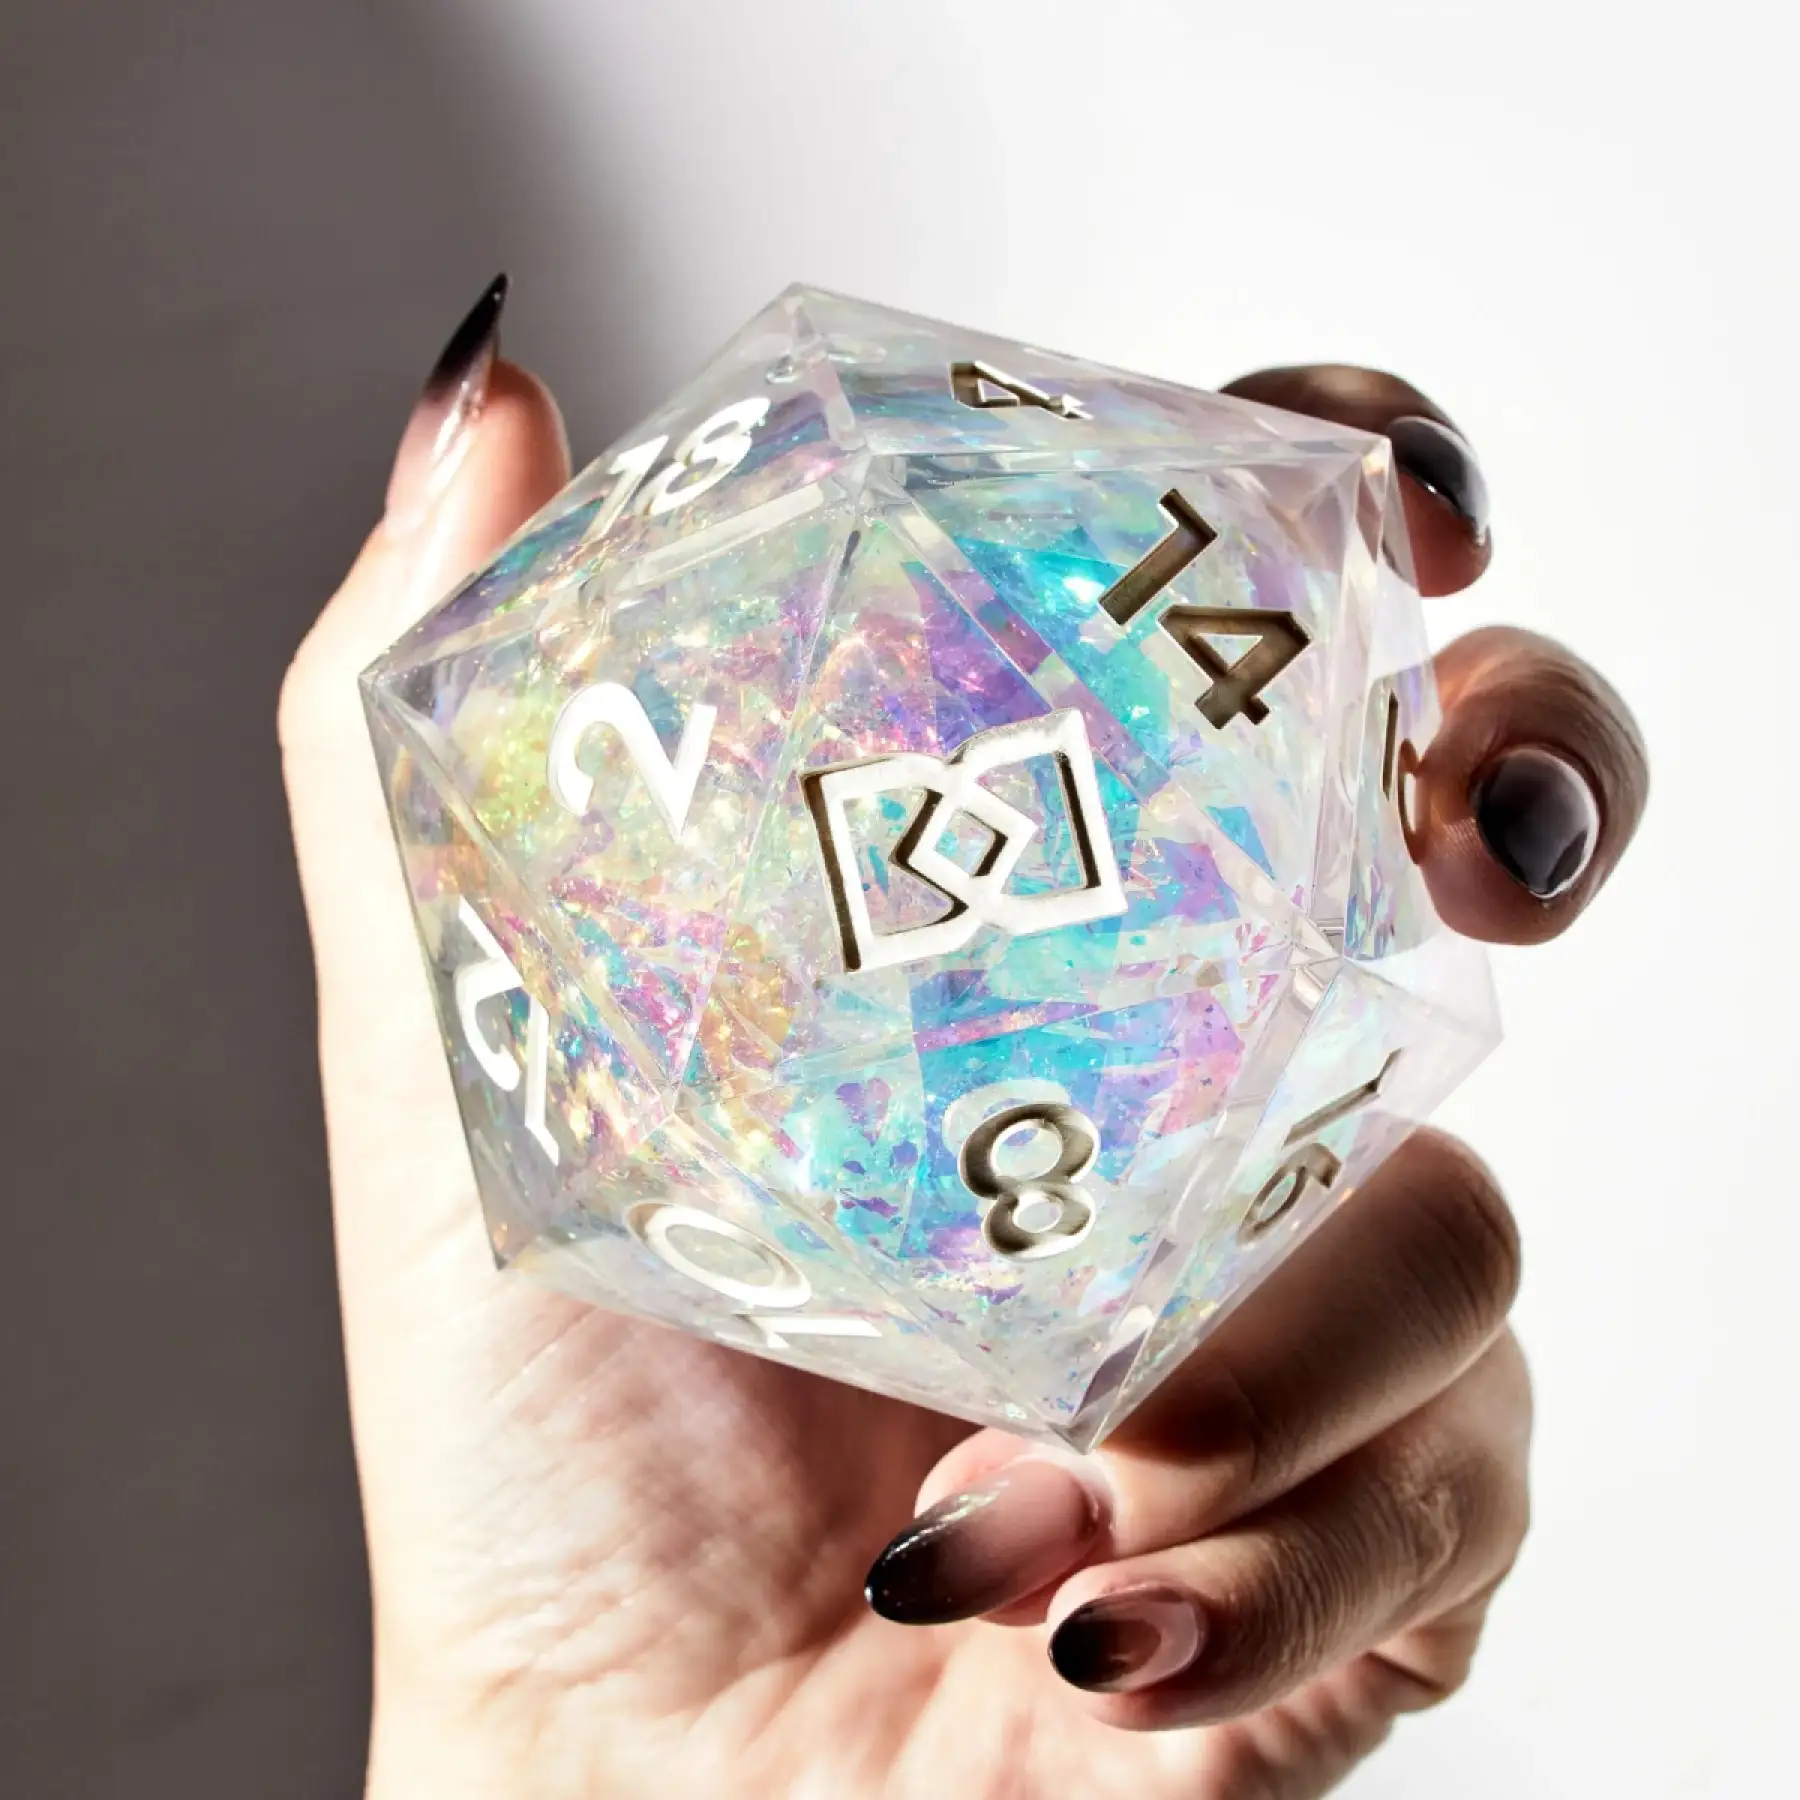 A giant iridescent silver D20